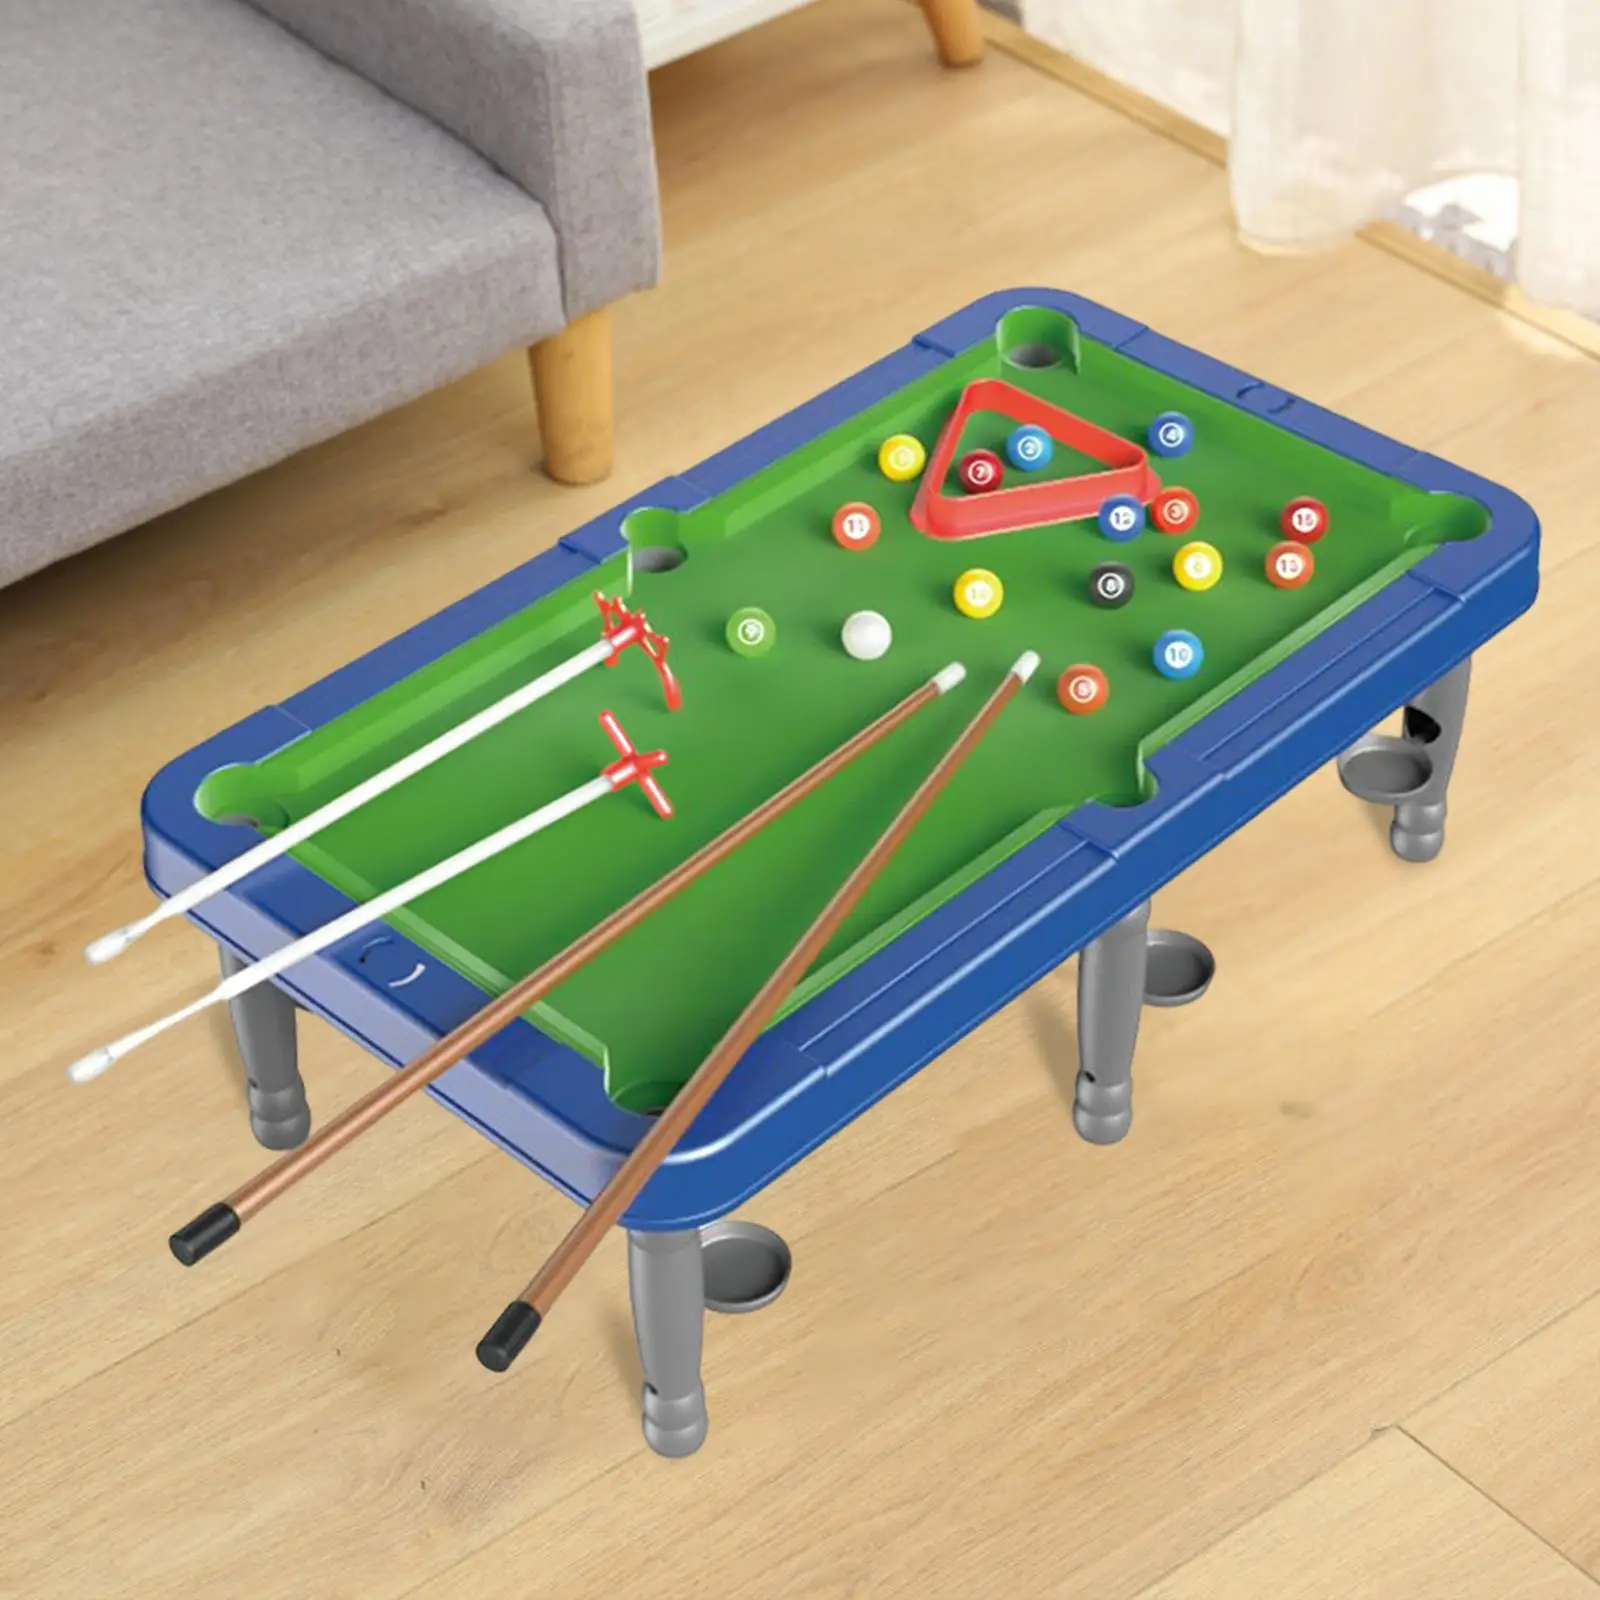 Durable Table Billiards Game Interaction Toys Table Billiards For Kids